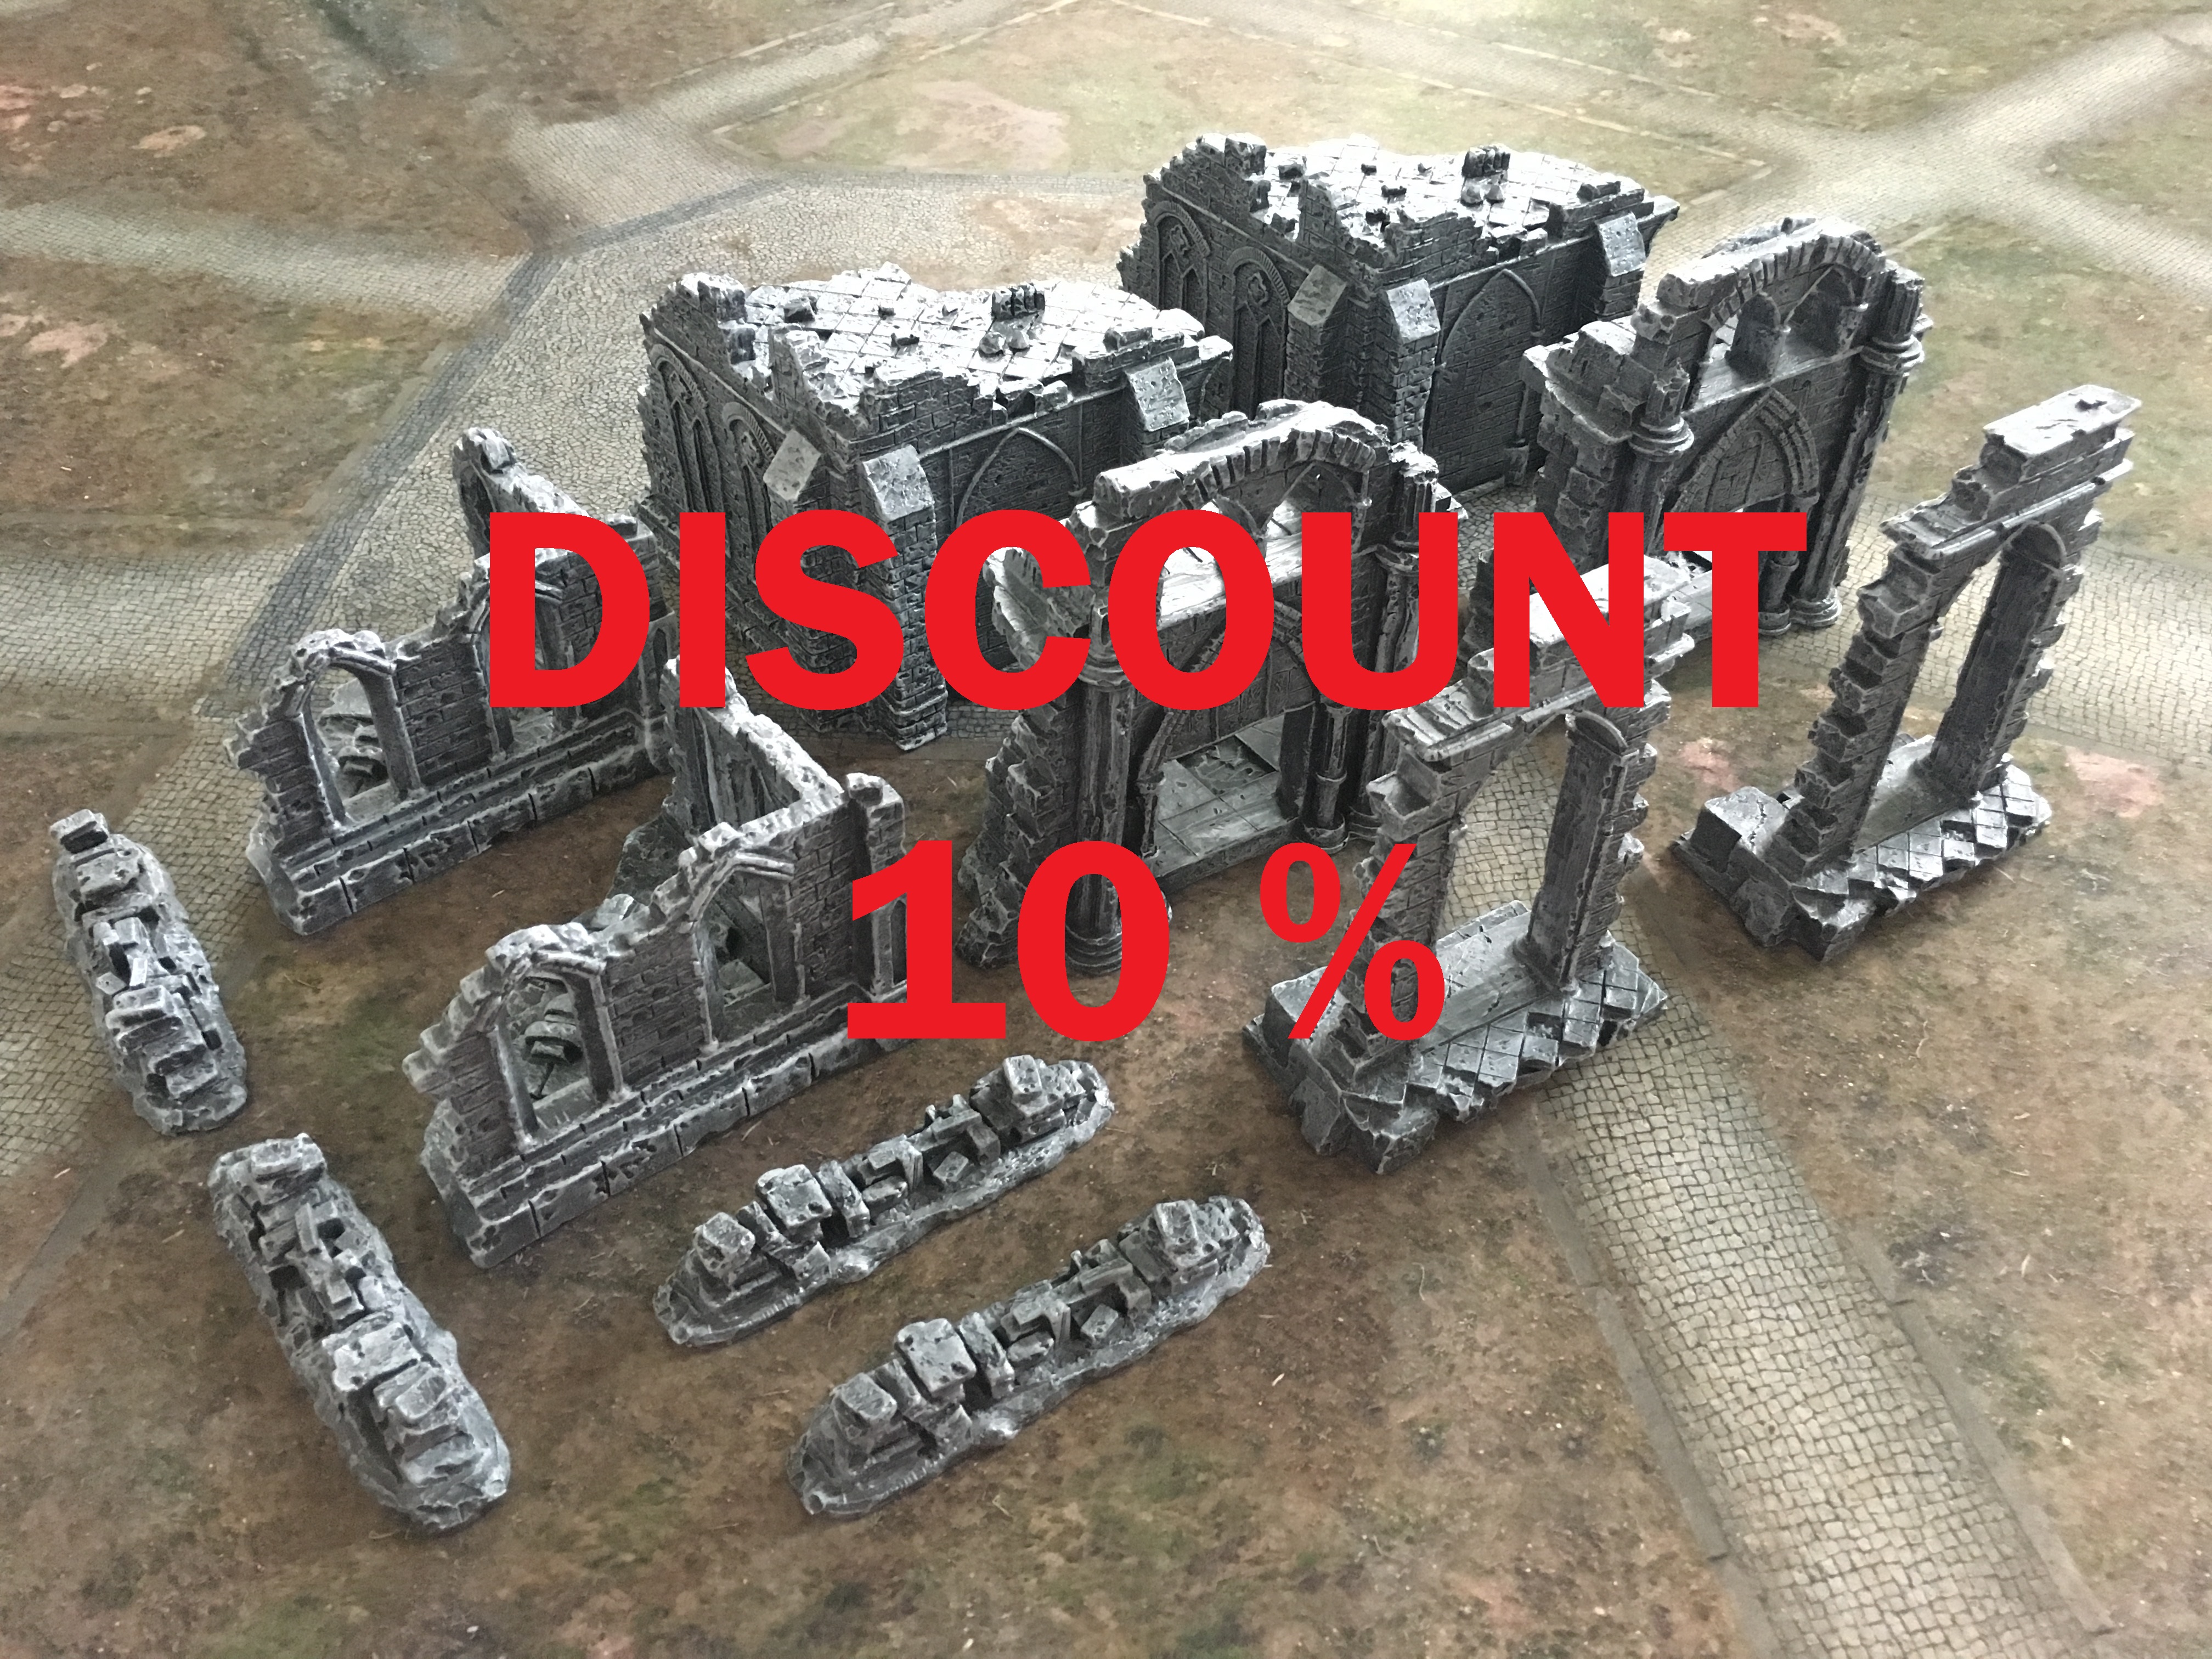 10 % DISCOUNT on 12 pcs Gates of the Realms prepainted terrain set